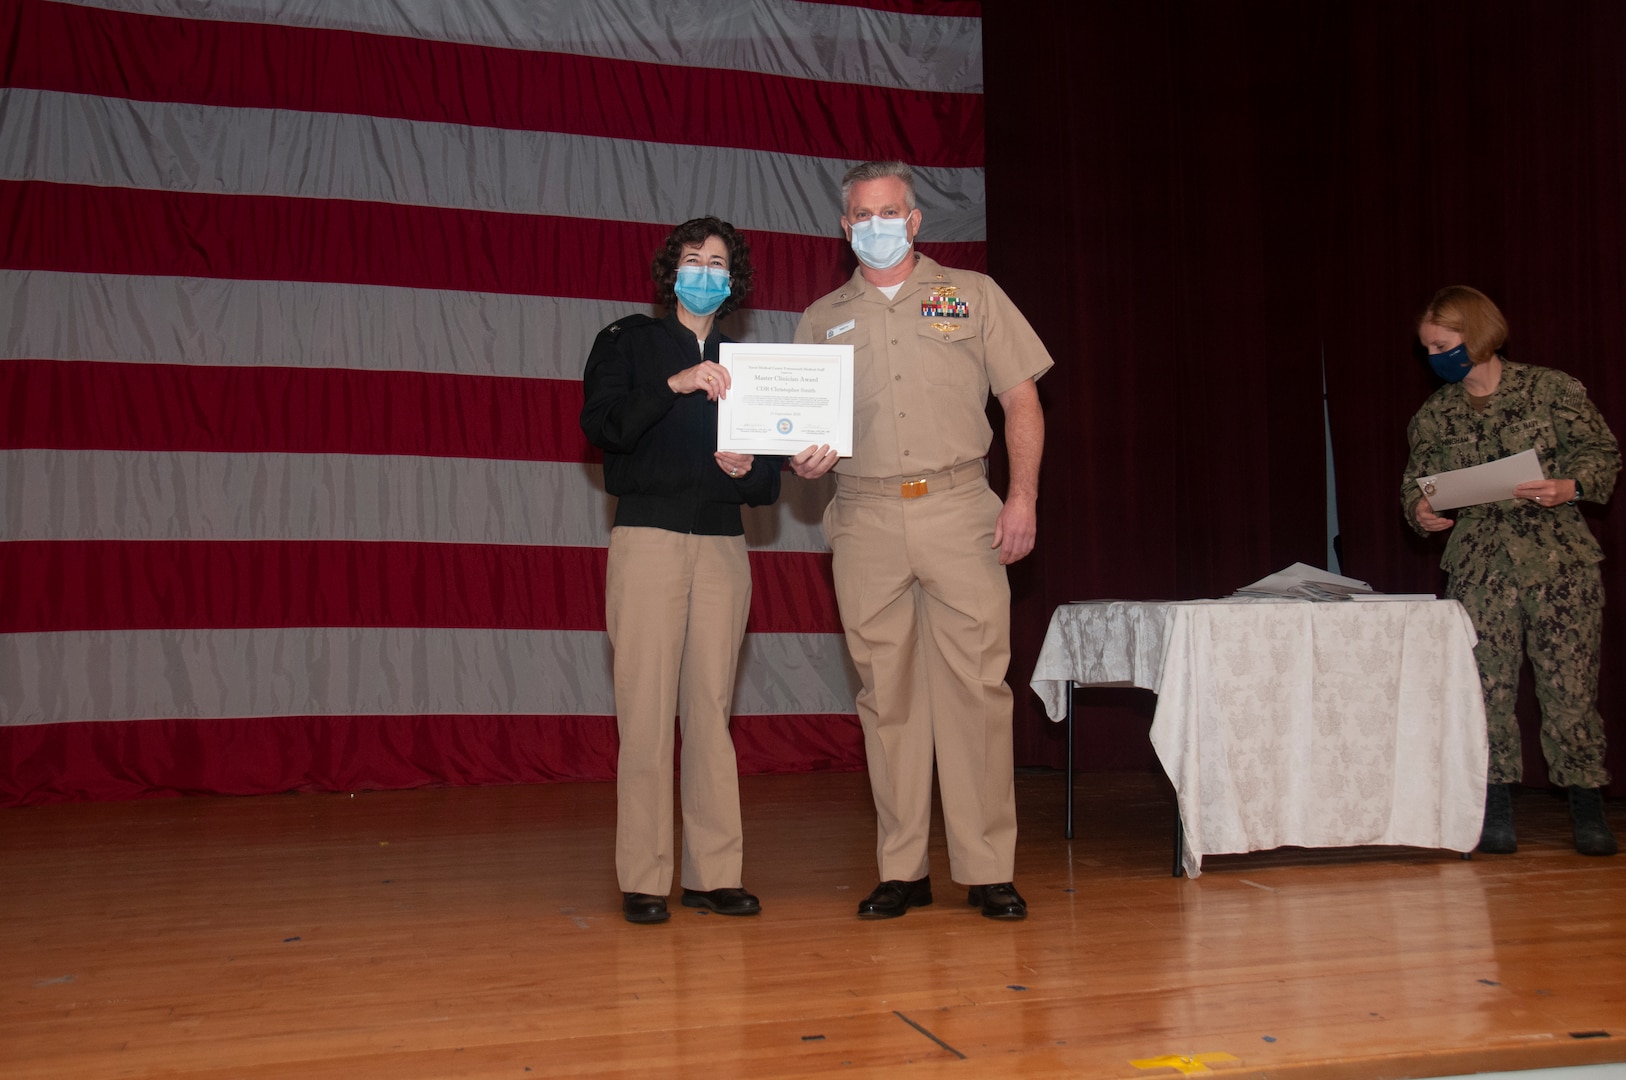 Cmdr. Christopher Smith receives a Master Clinician Award from Capt. Lisa Mulligan, Commanding Officer, NMCP at the Medical Center Nov. 10.